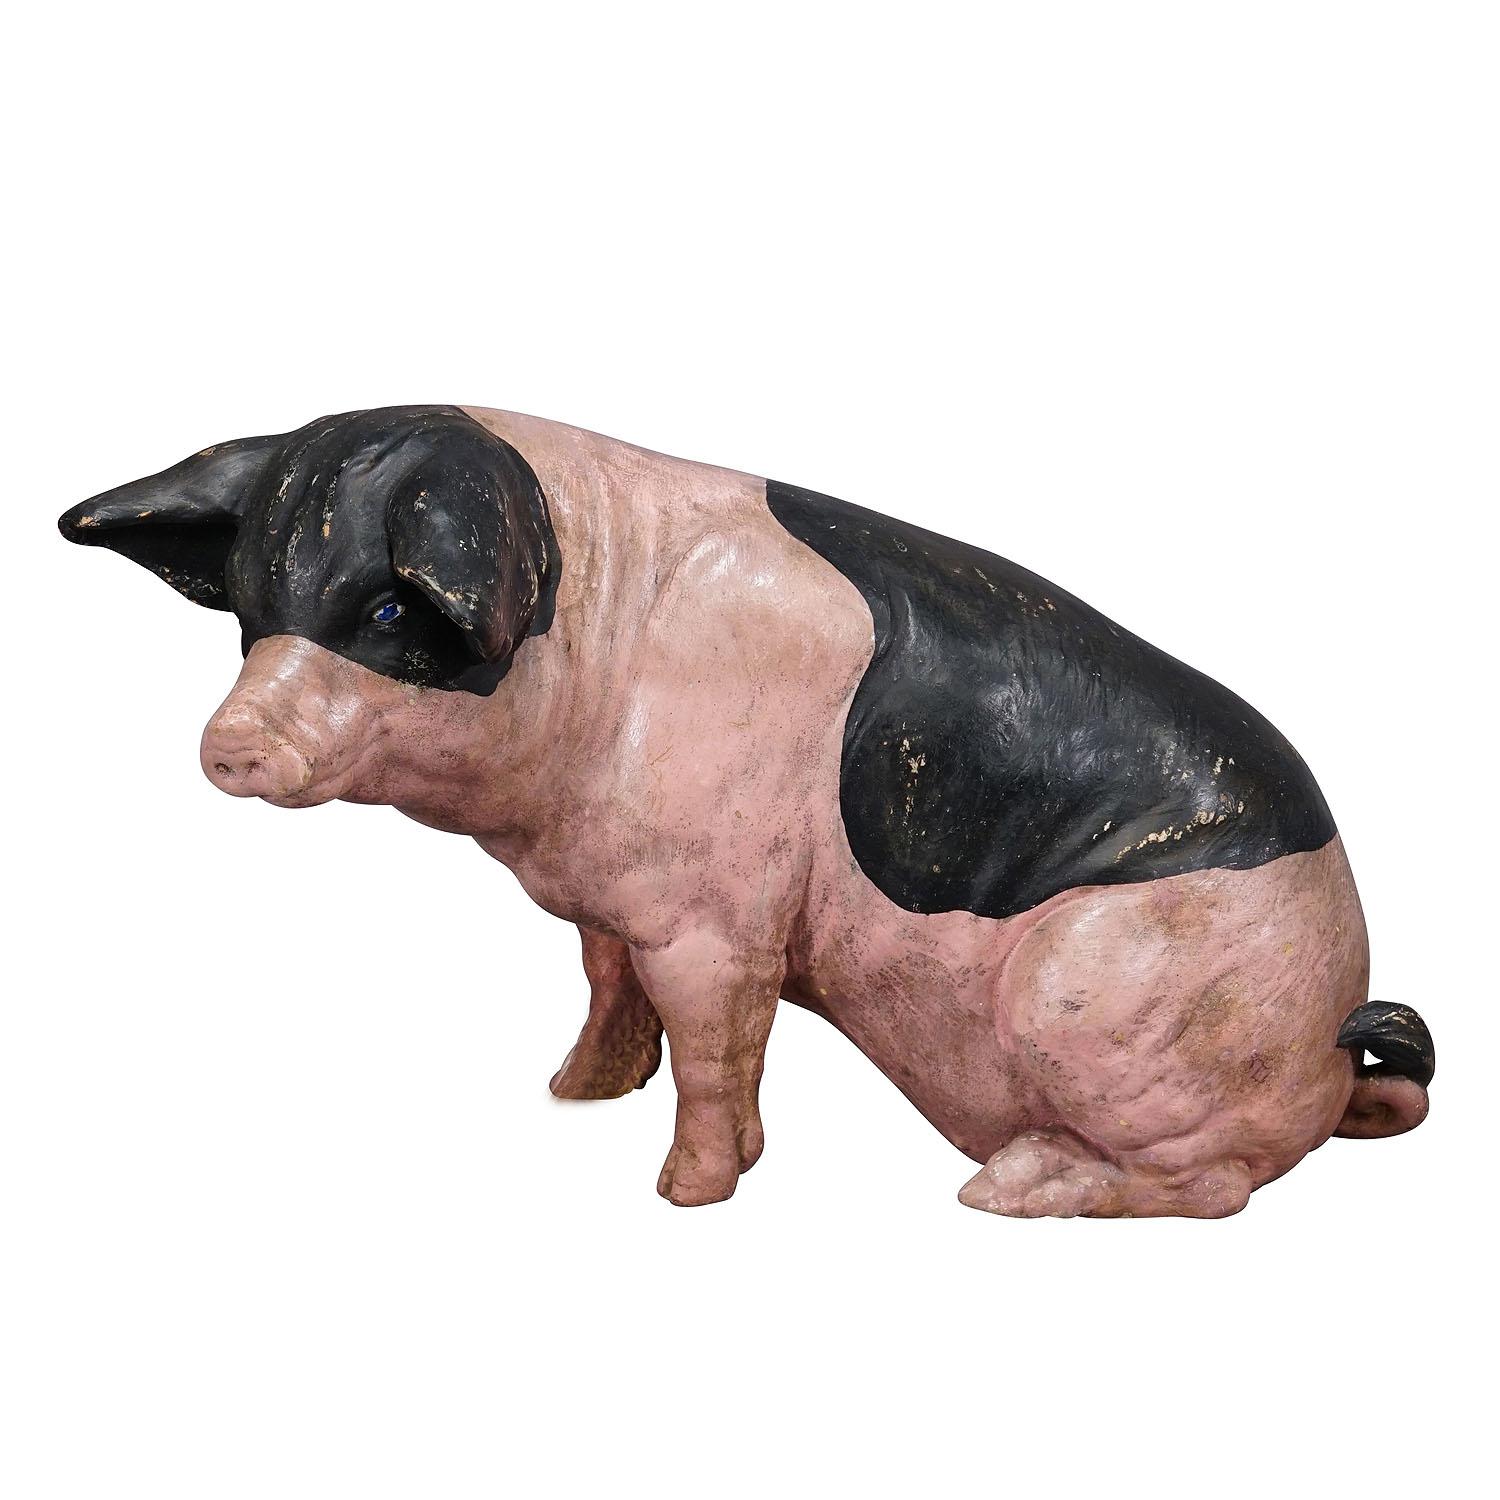 1930s Swabian Hallic Country Pig Made of Terracotta

A vintage statue of a Swabian hallic country pig. It was used as shop window decoration in a German butchery. The statue is made of teracotta and was manufactured most probably by Heissner around